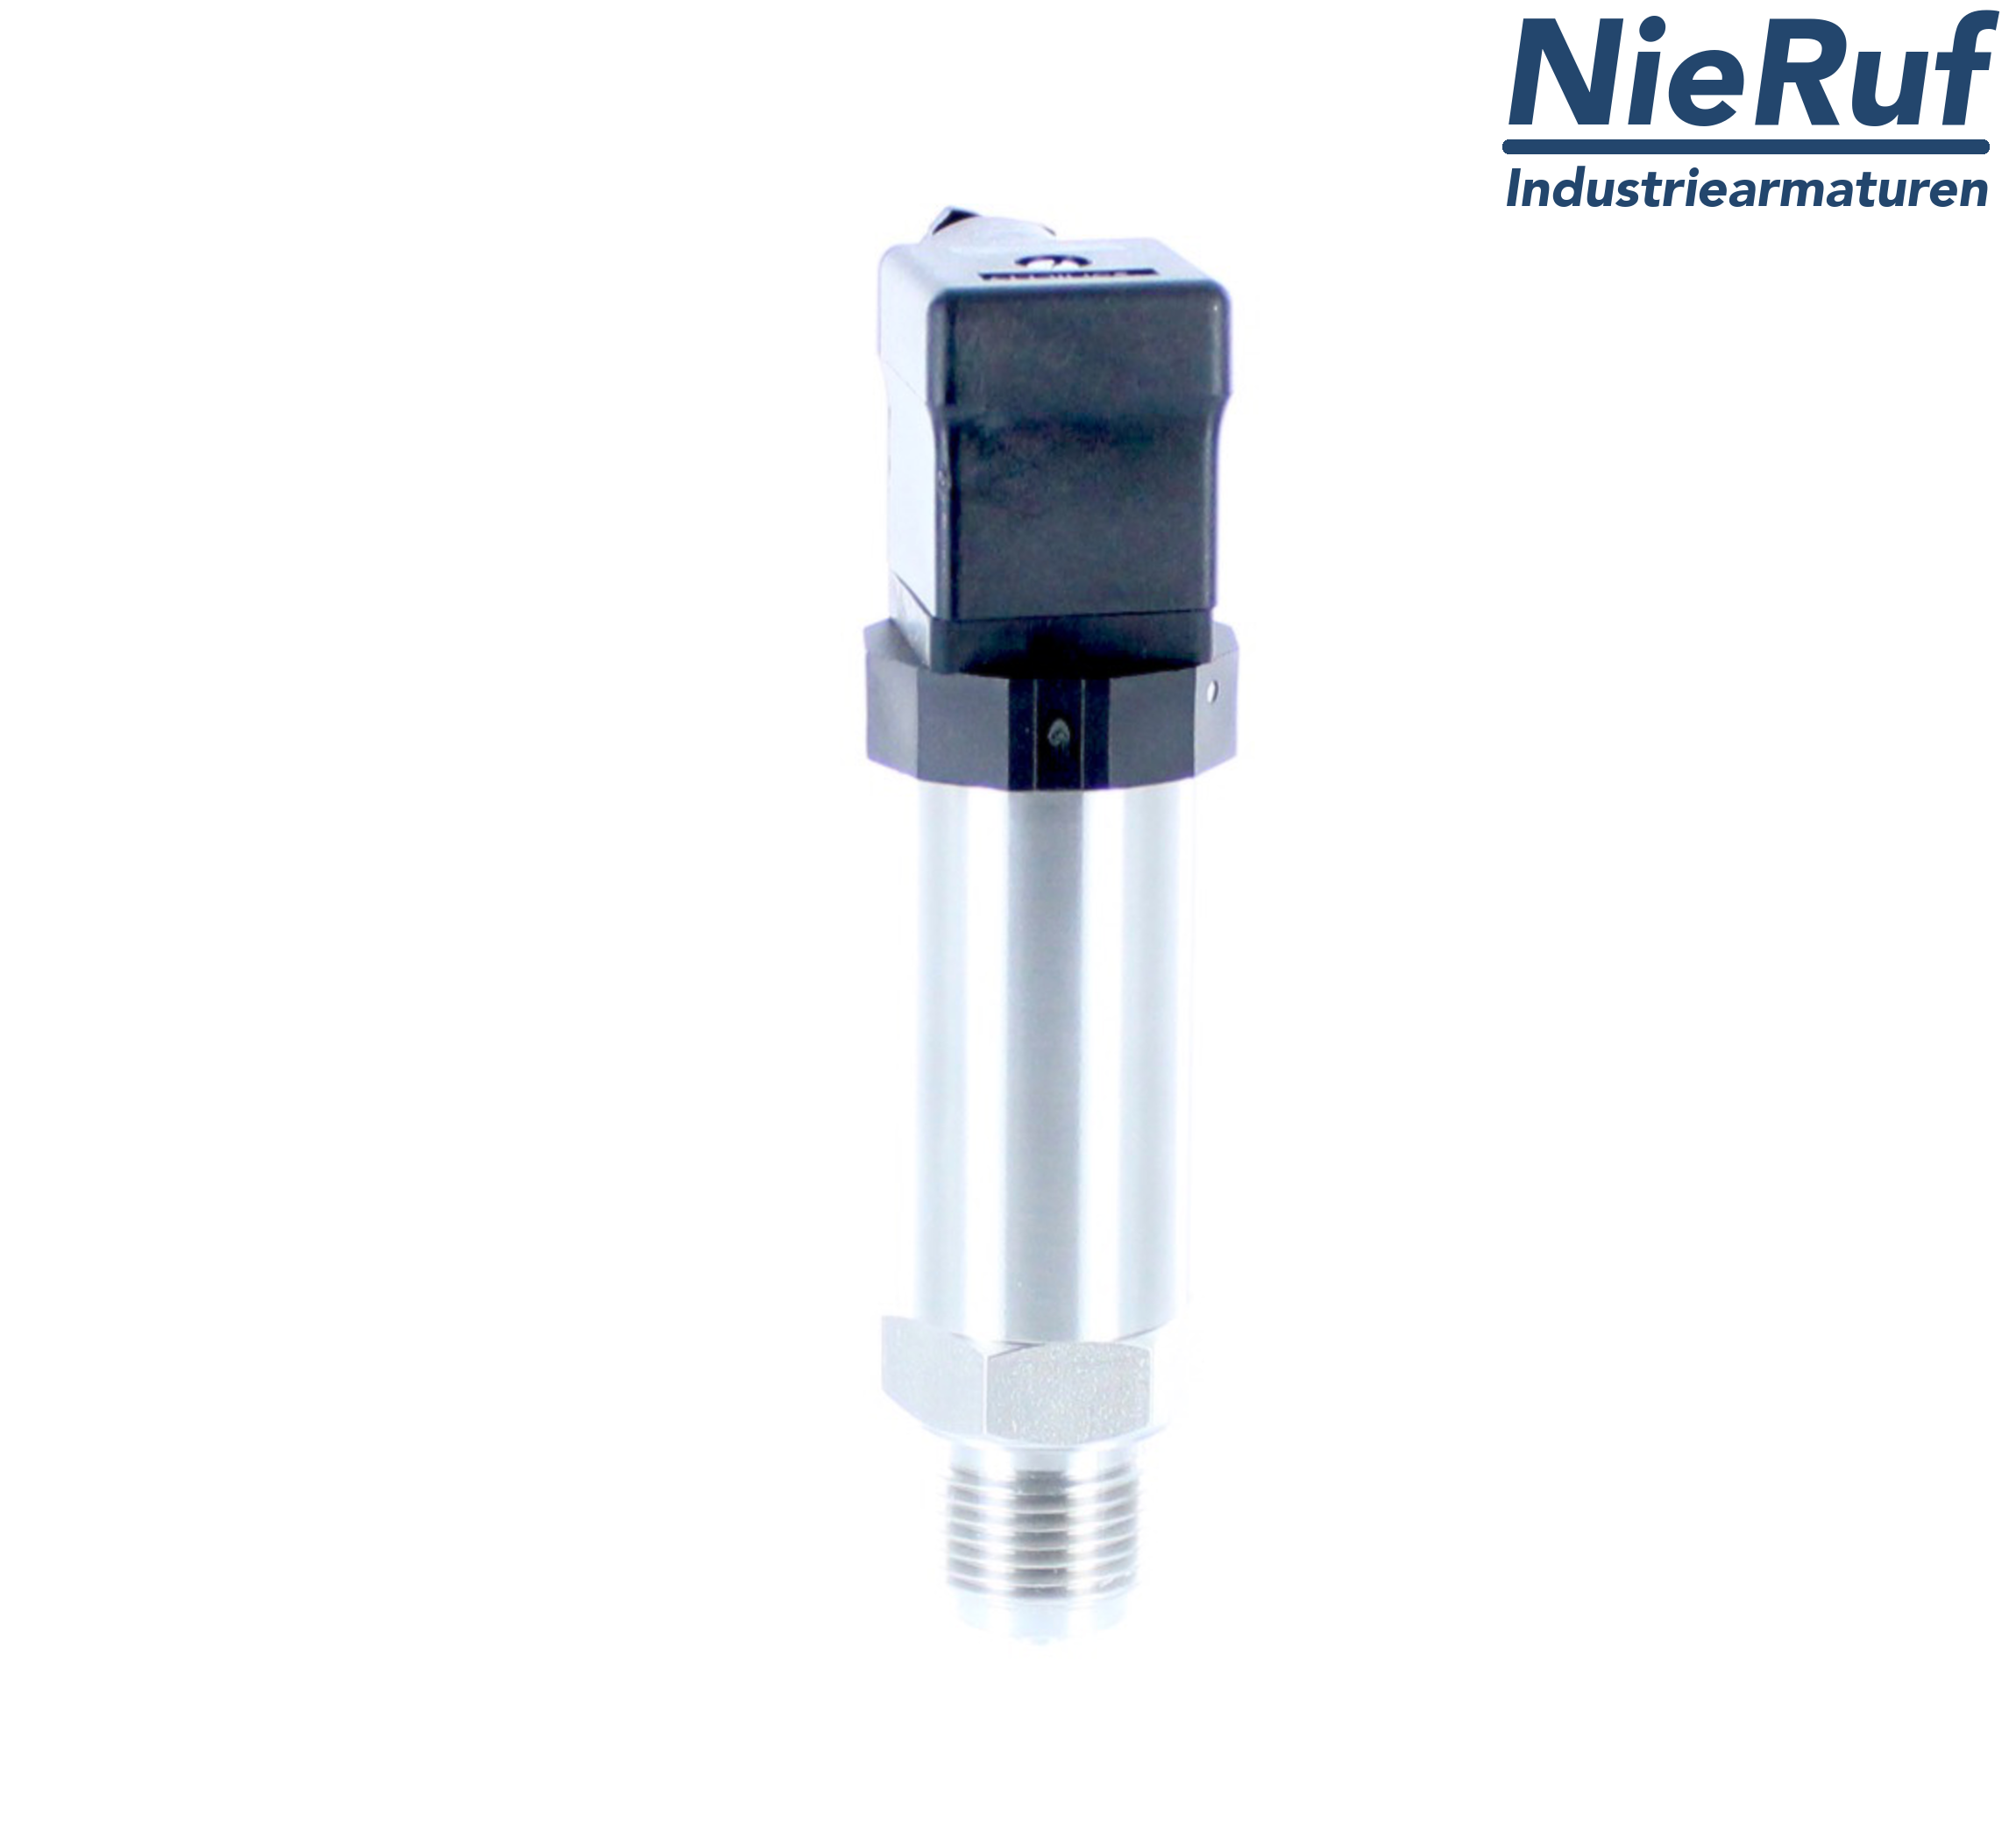 pressure sensor G 1/4" B DS01 stainless steel 2-wire: 4-20mA FPM 0,0 - 1,6 bar